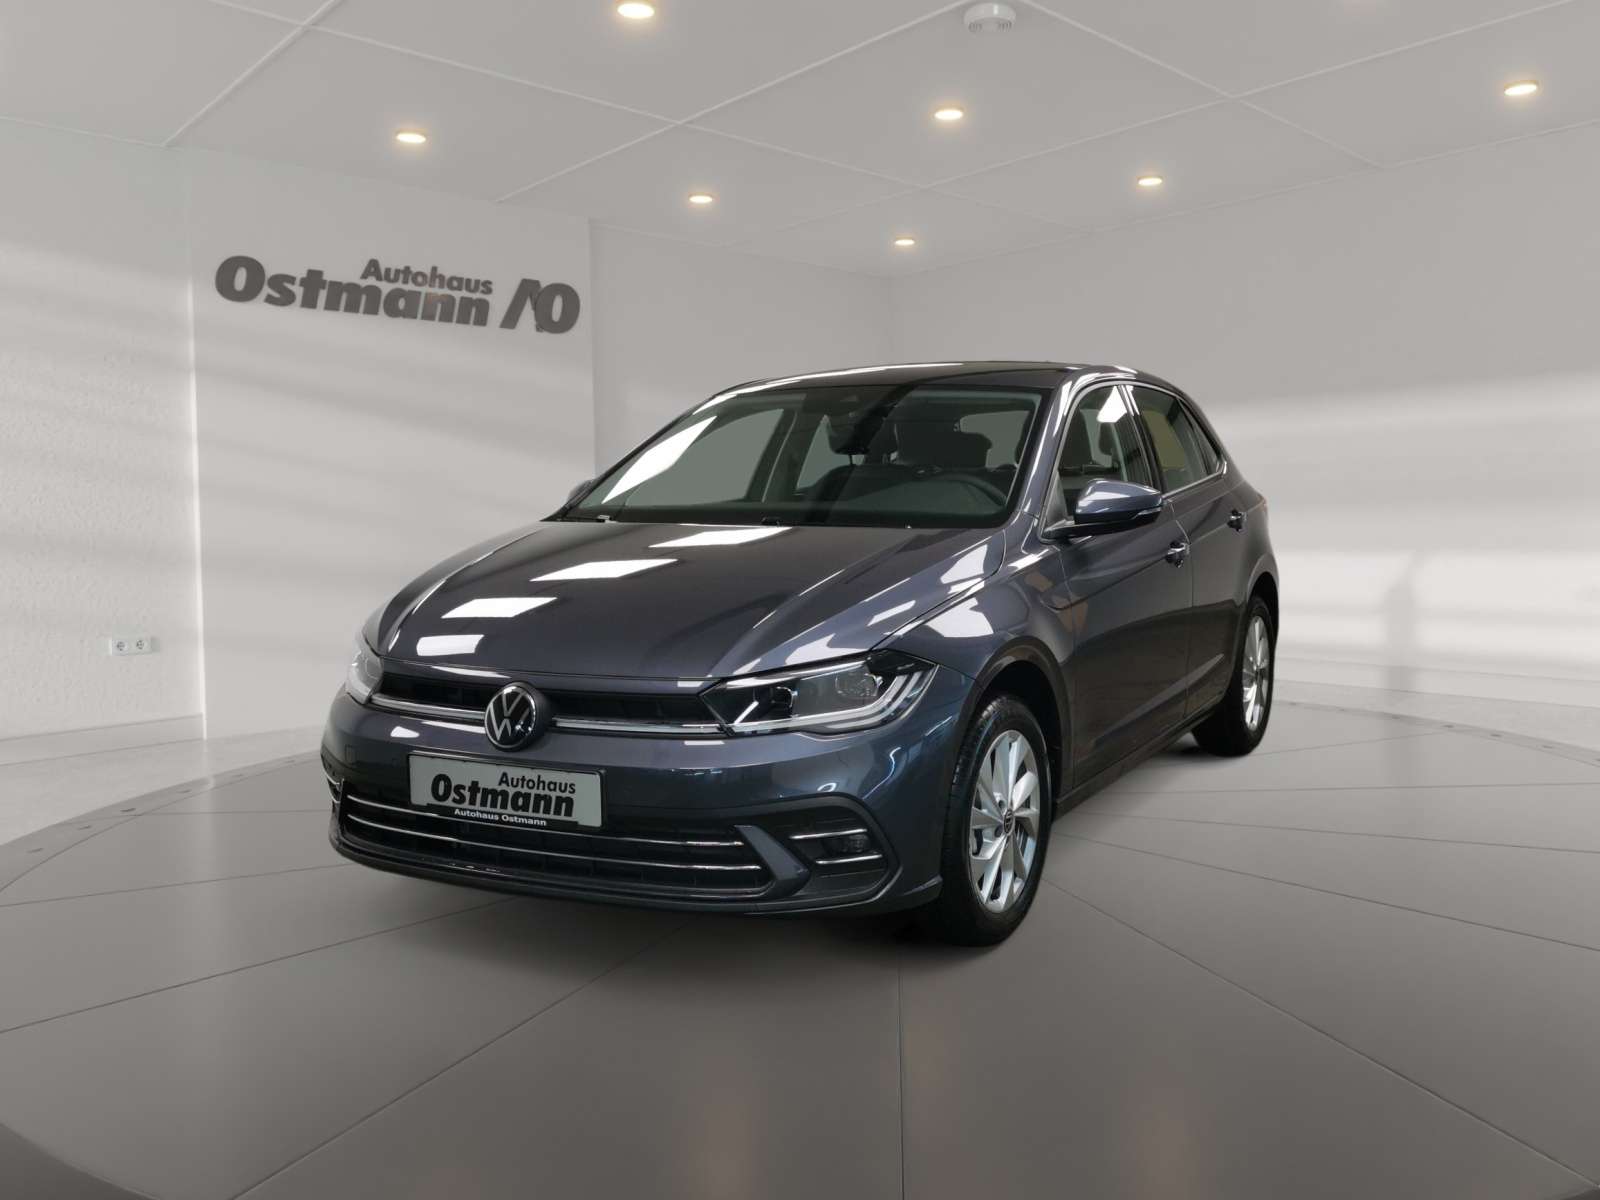 Volkswagen Polo Compact in Grey pre-registered in Wolfhagen for € 99,999.-